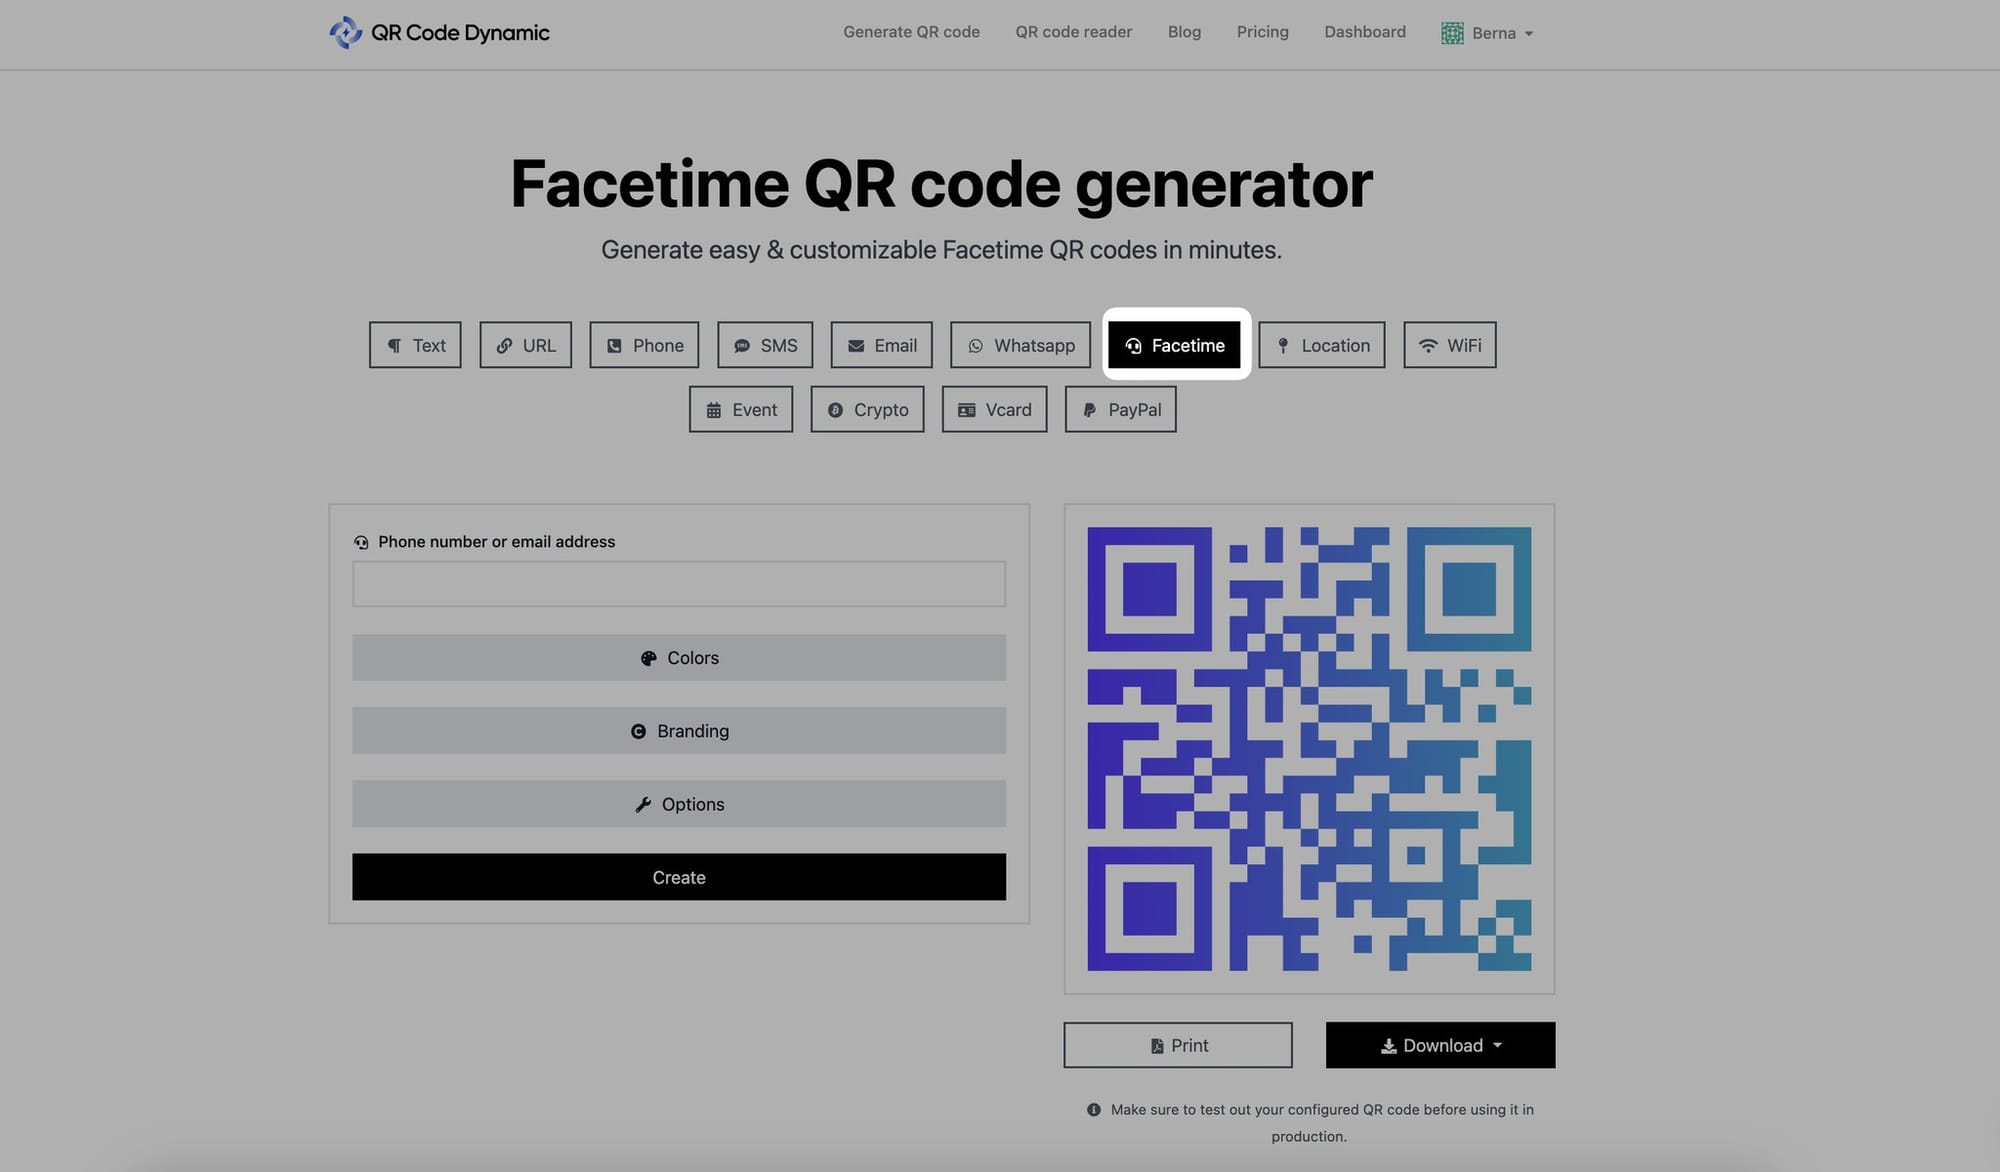 selecting facetime from qr code categories